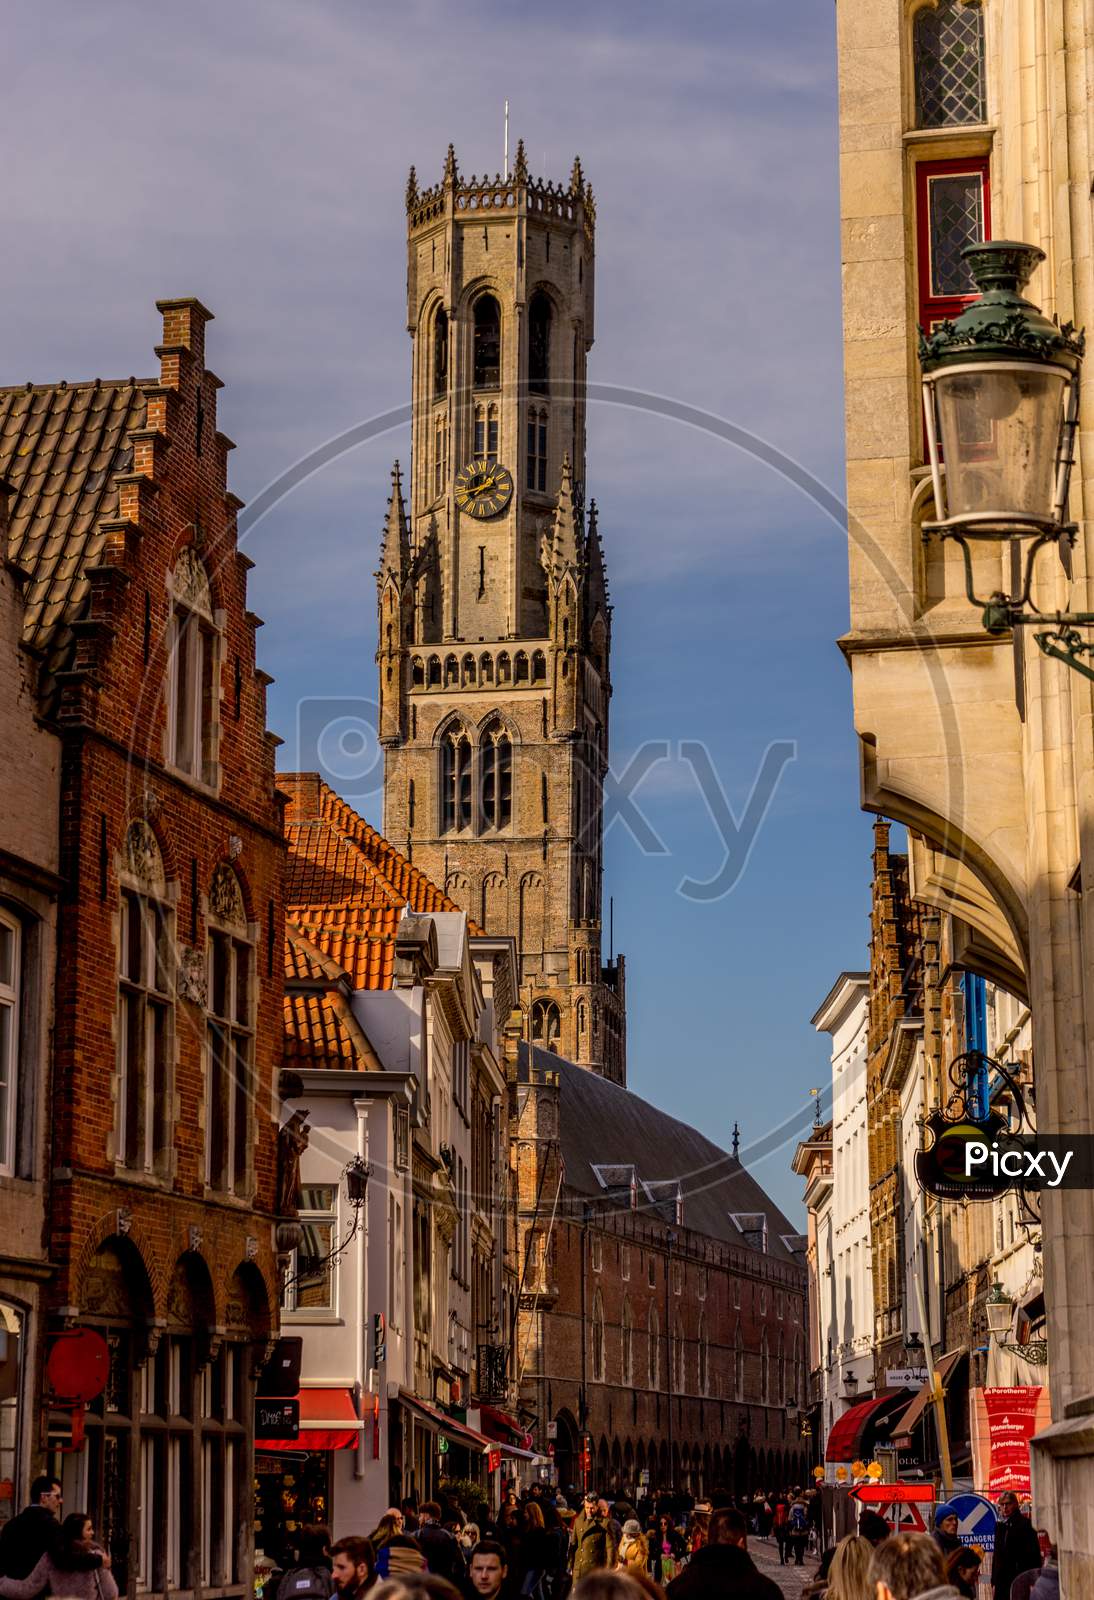 Bruges, Belgium - 17 February 2018: Belfry Of Bruges, A Group Of People Walking In Front Of A Clock Tower With Belfry Of Bruges In The Background